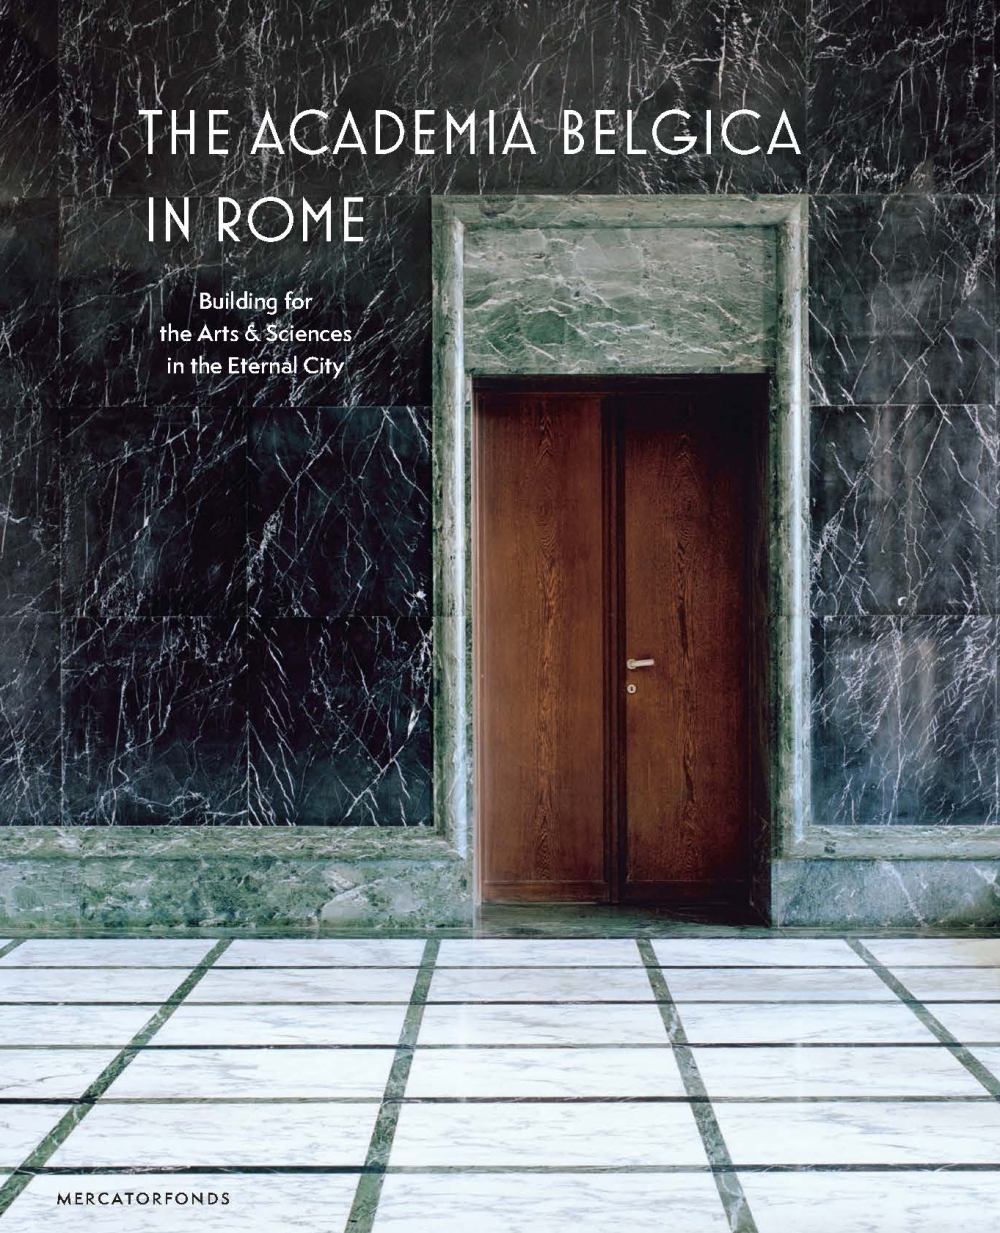 The Academia Belgica in Rome